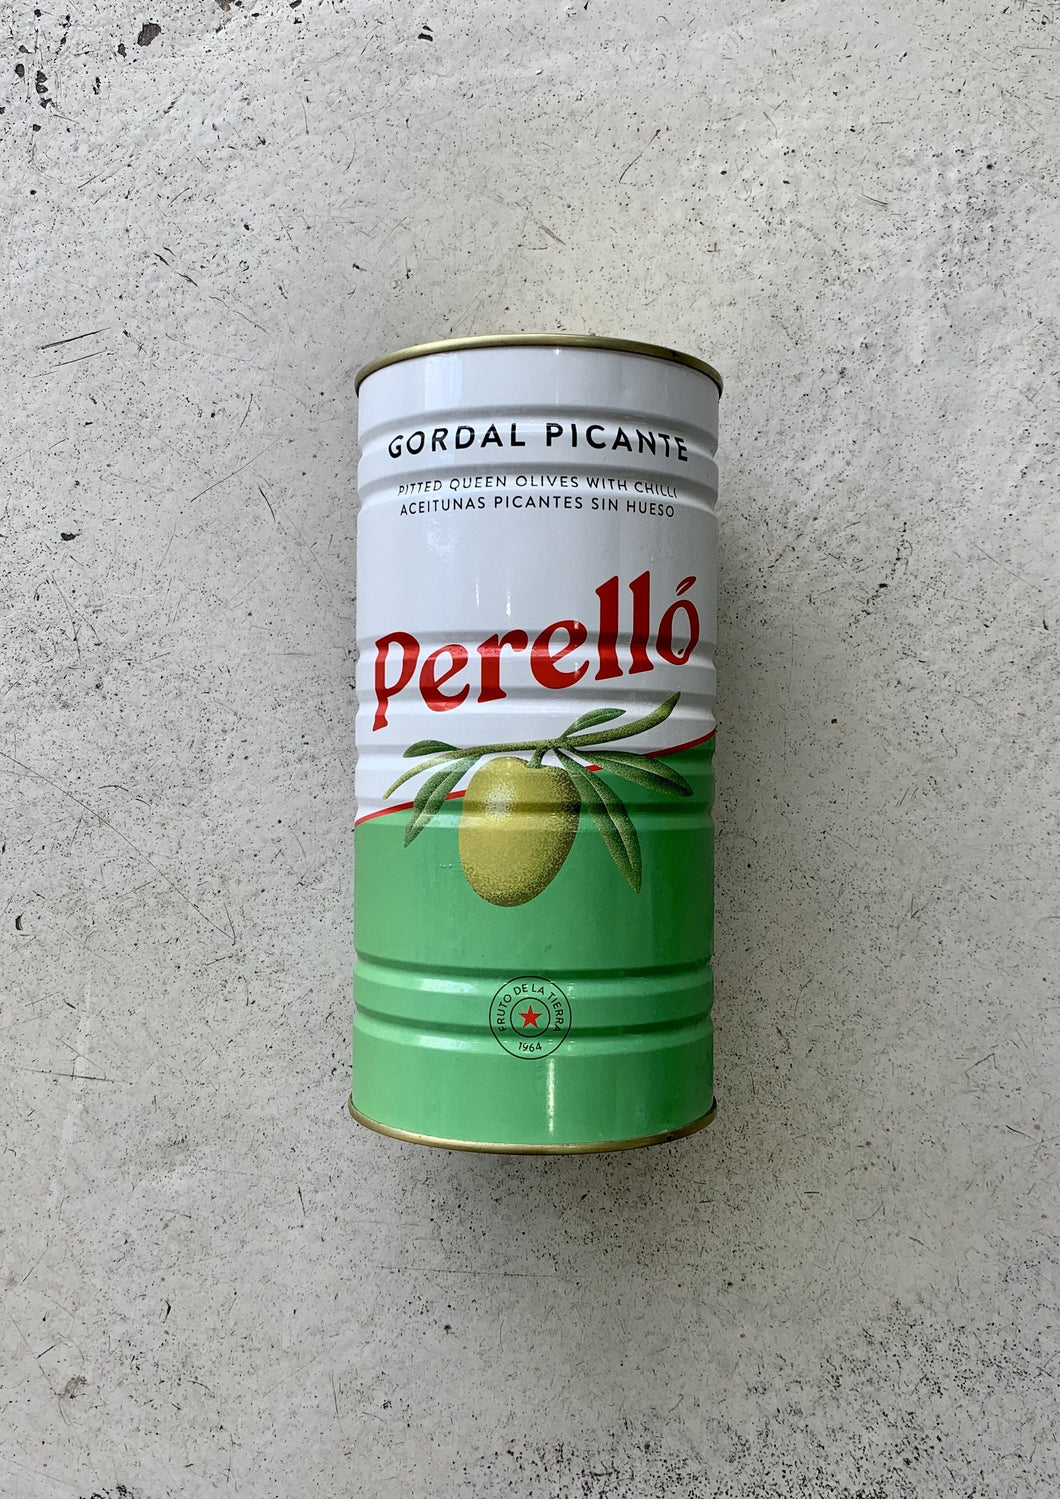 Perelló Gordal Picante Pitted Olives (600g)